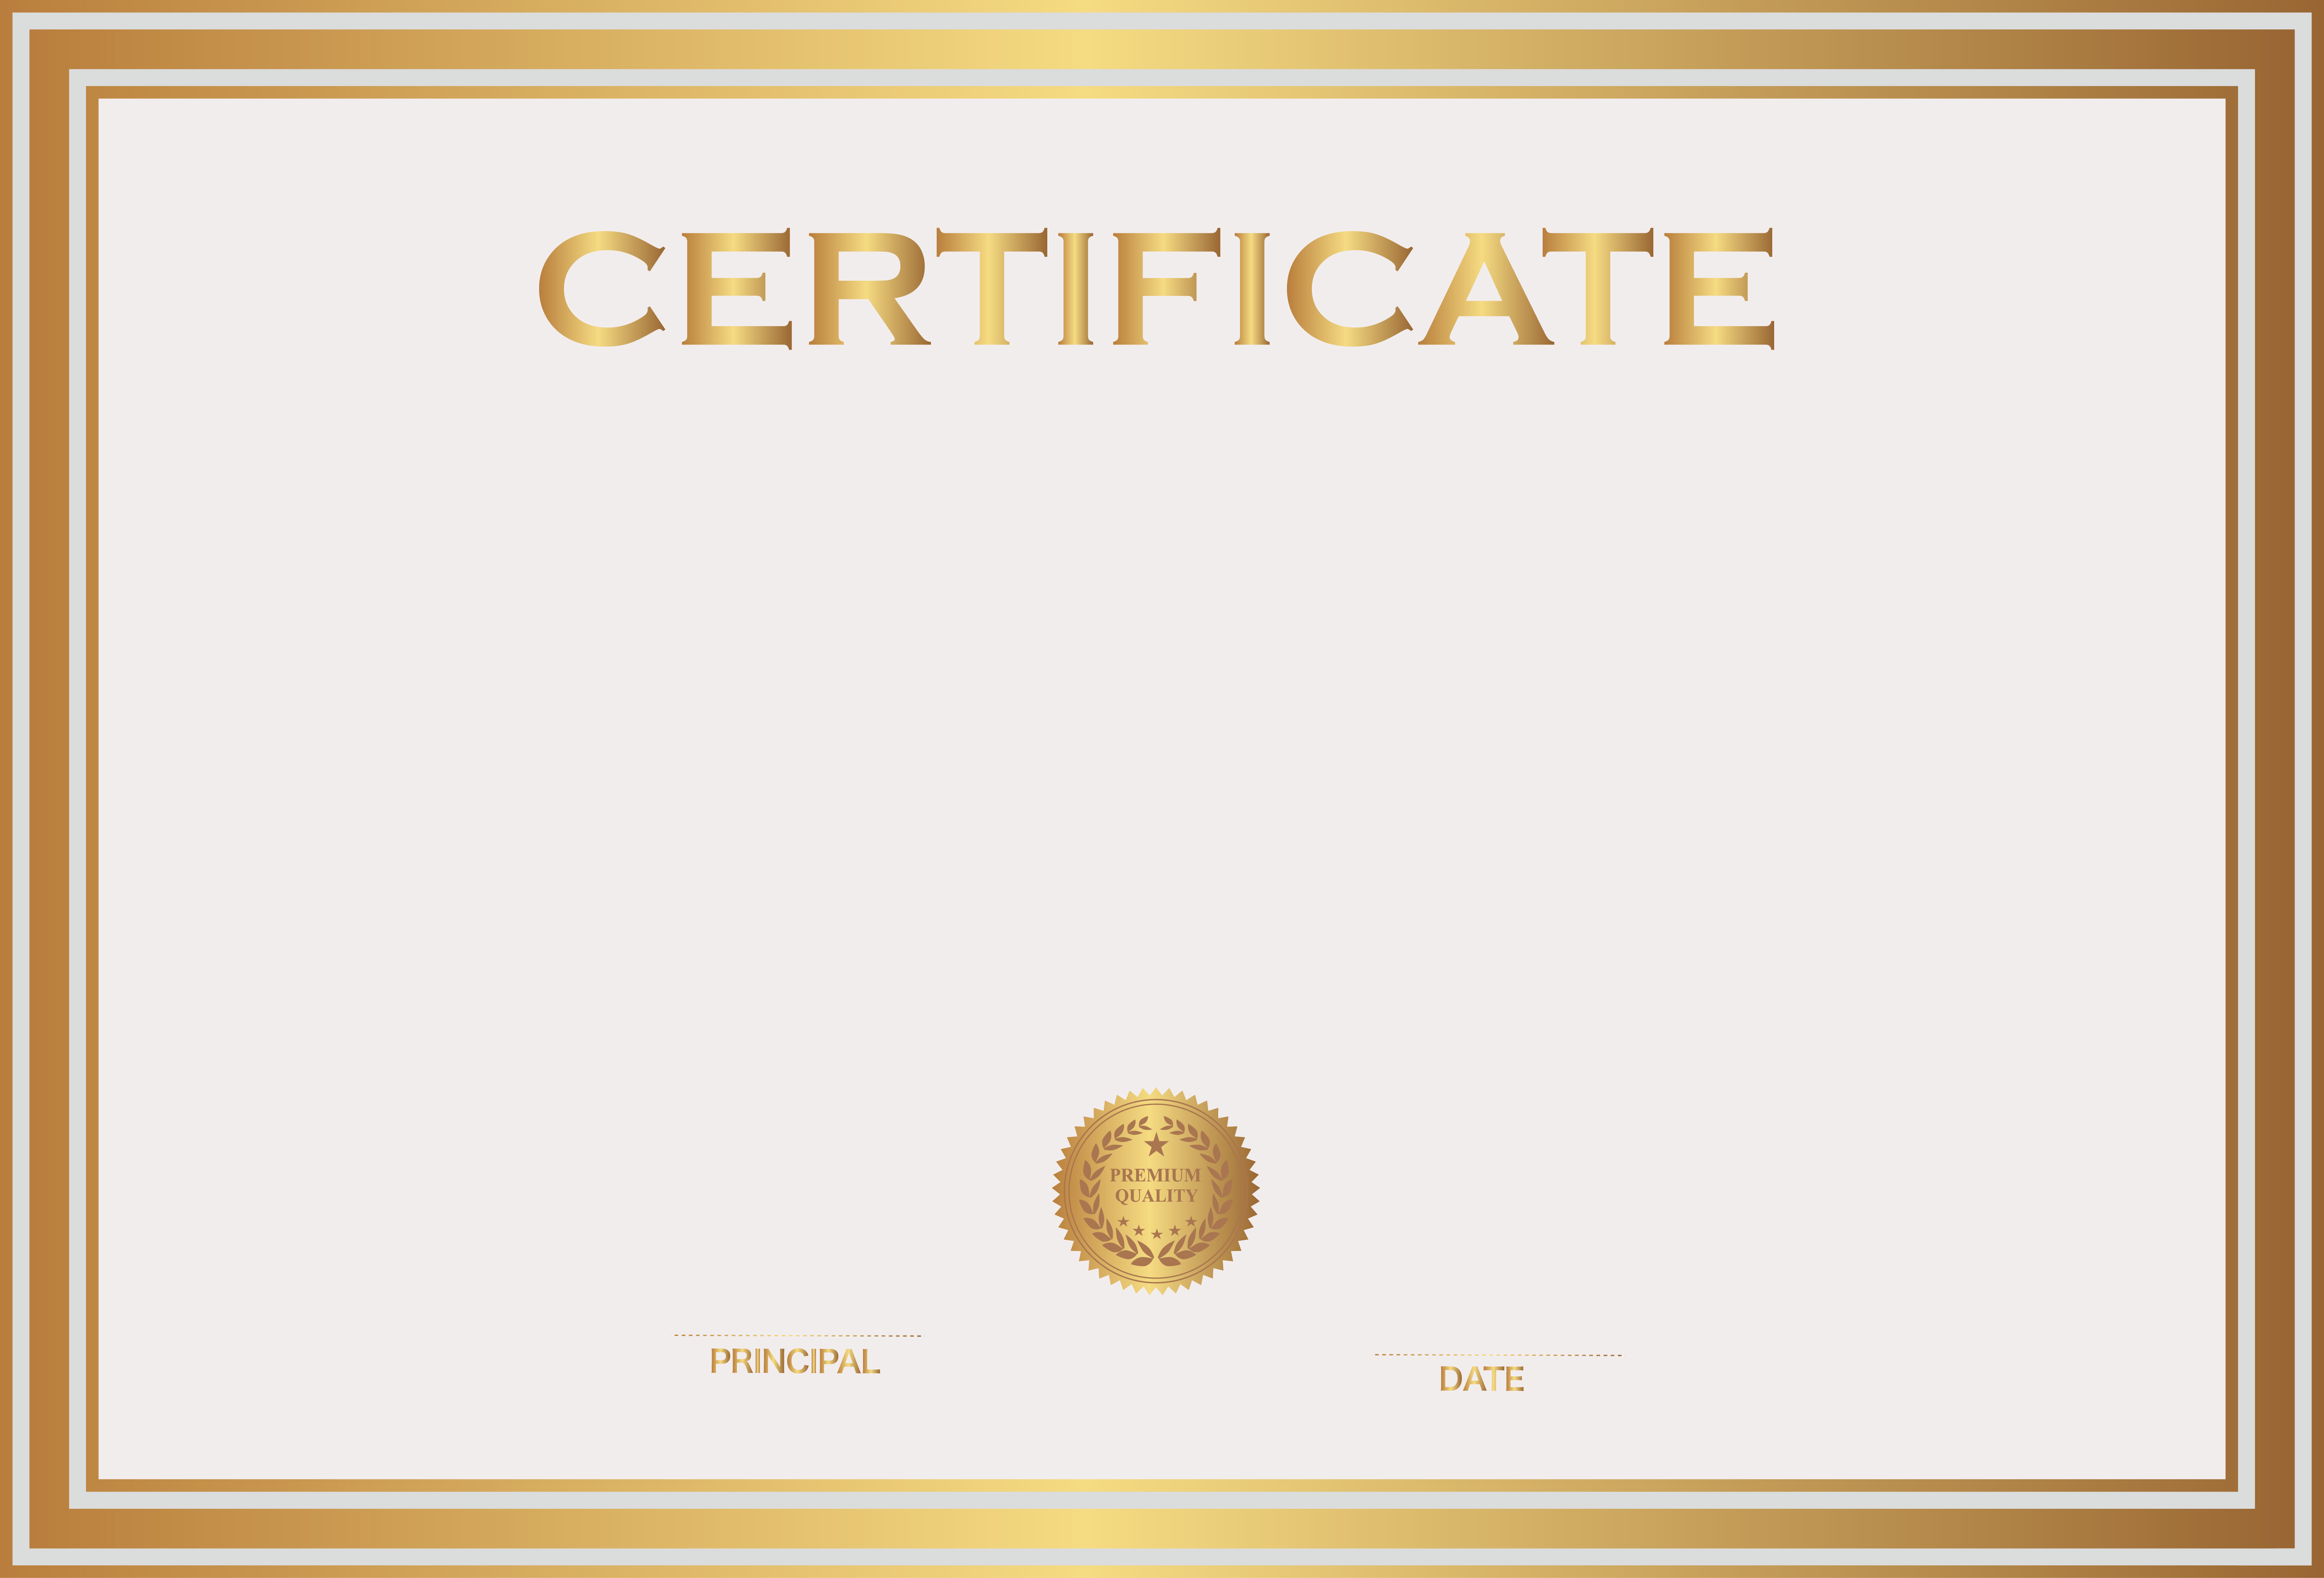 Free Certificate Template PNG Transparent Images, Download.